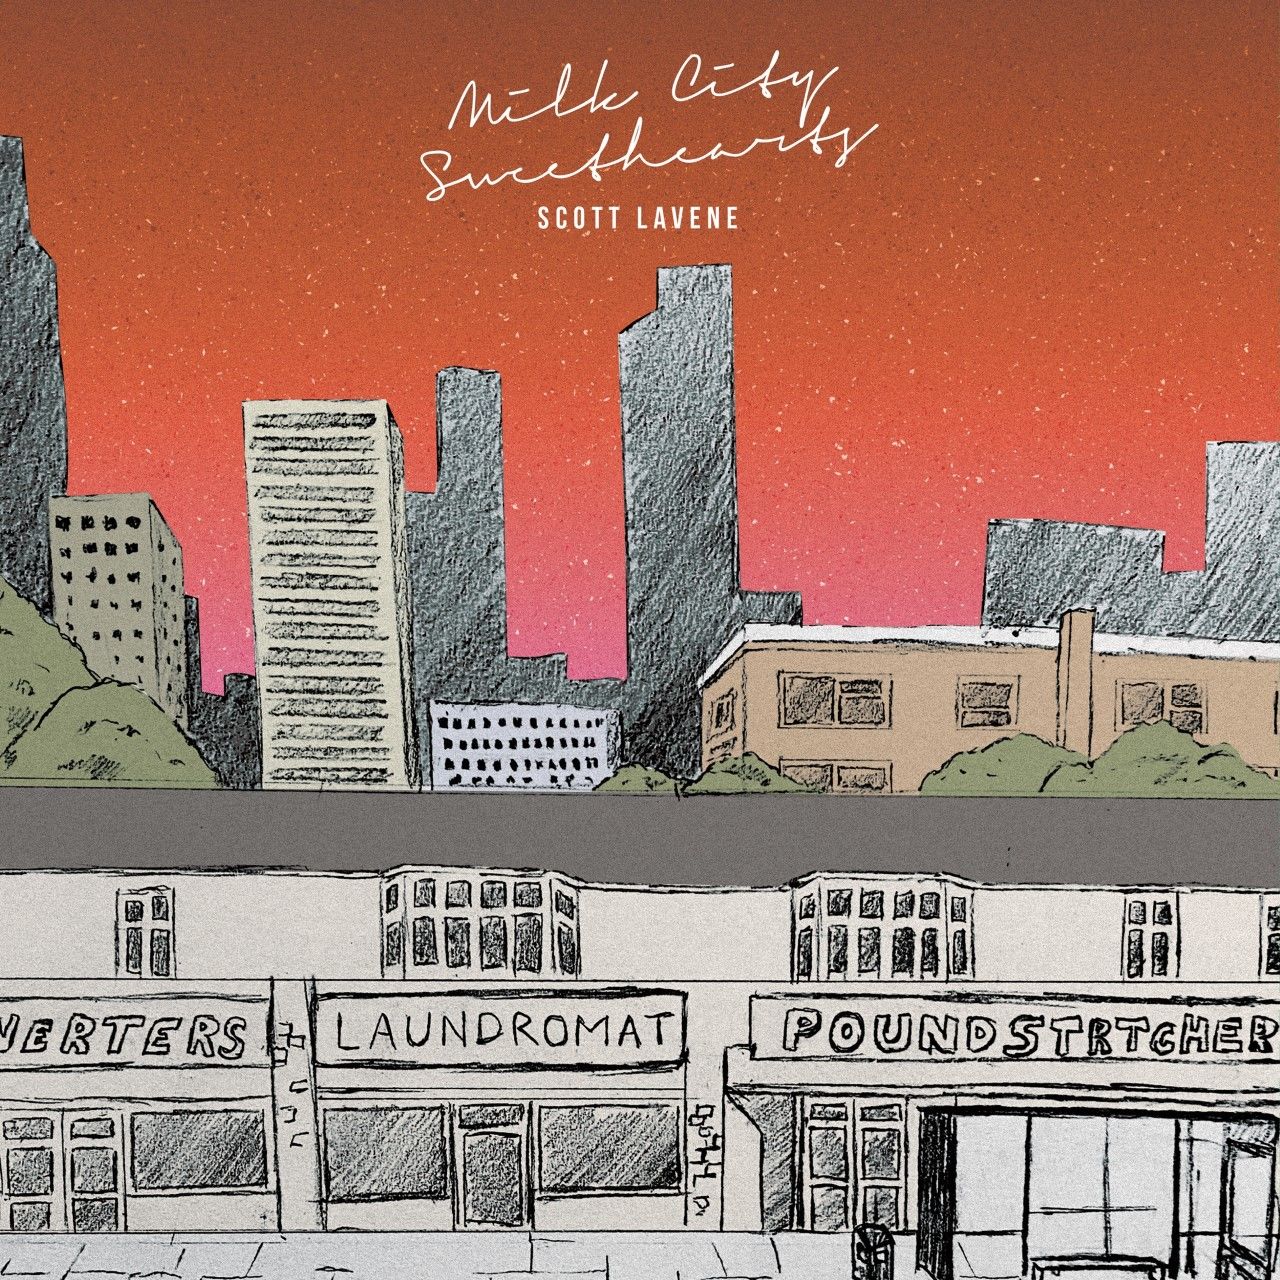 Milk City Sweethearts: Limited Edition Black + Red Vinyl LP